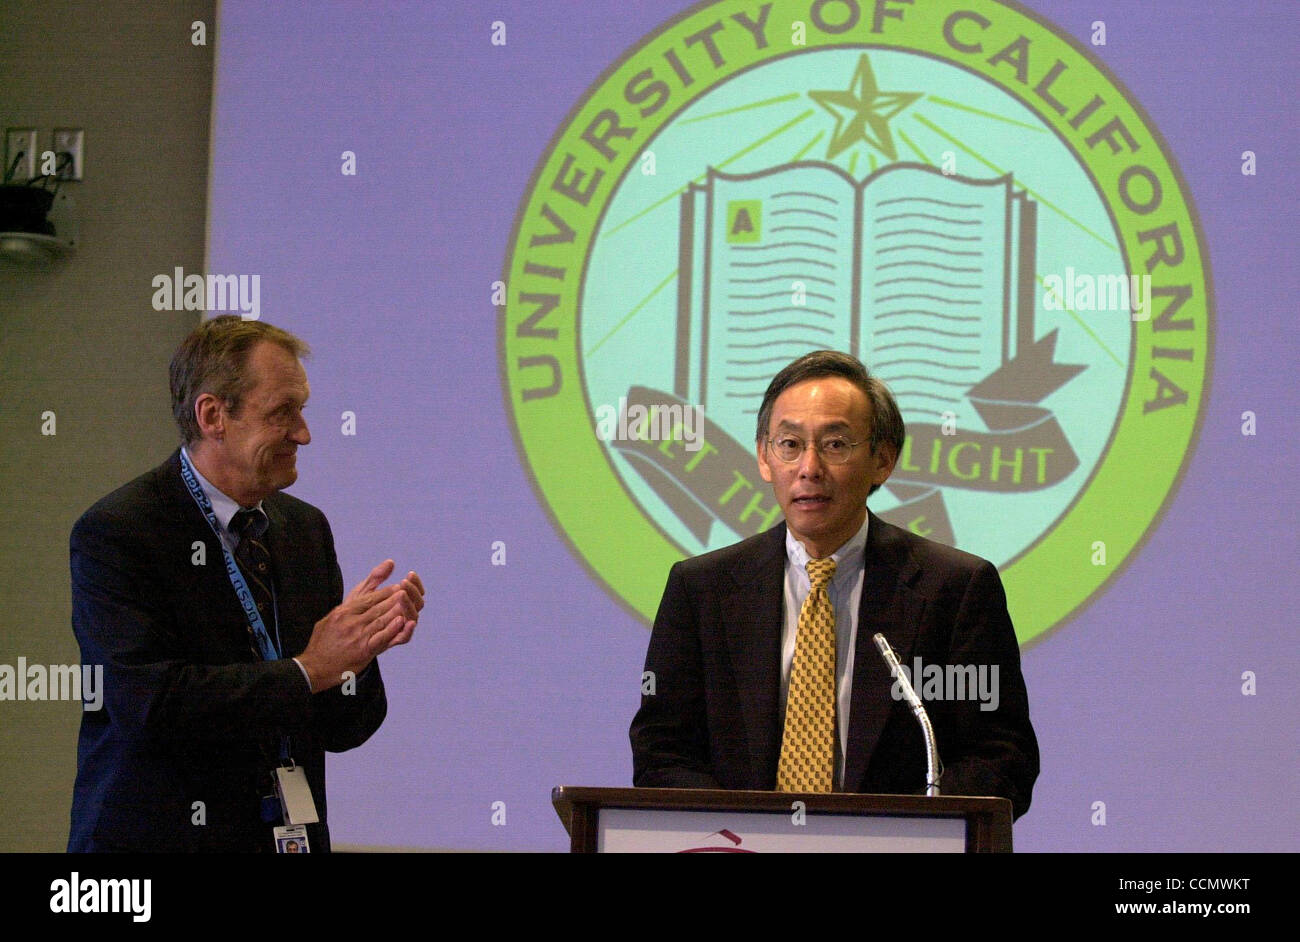 UC President Robert C. Dynes, left, introduces the new  Director of Lawrence Berkeley National Laboratory, Steven Chu, right, a professor in the physics and applied physics departments at Stanford University and a co-winnner of the Noble Prize in physics, during a press conference in Berkeley, Calif Stock Photo